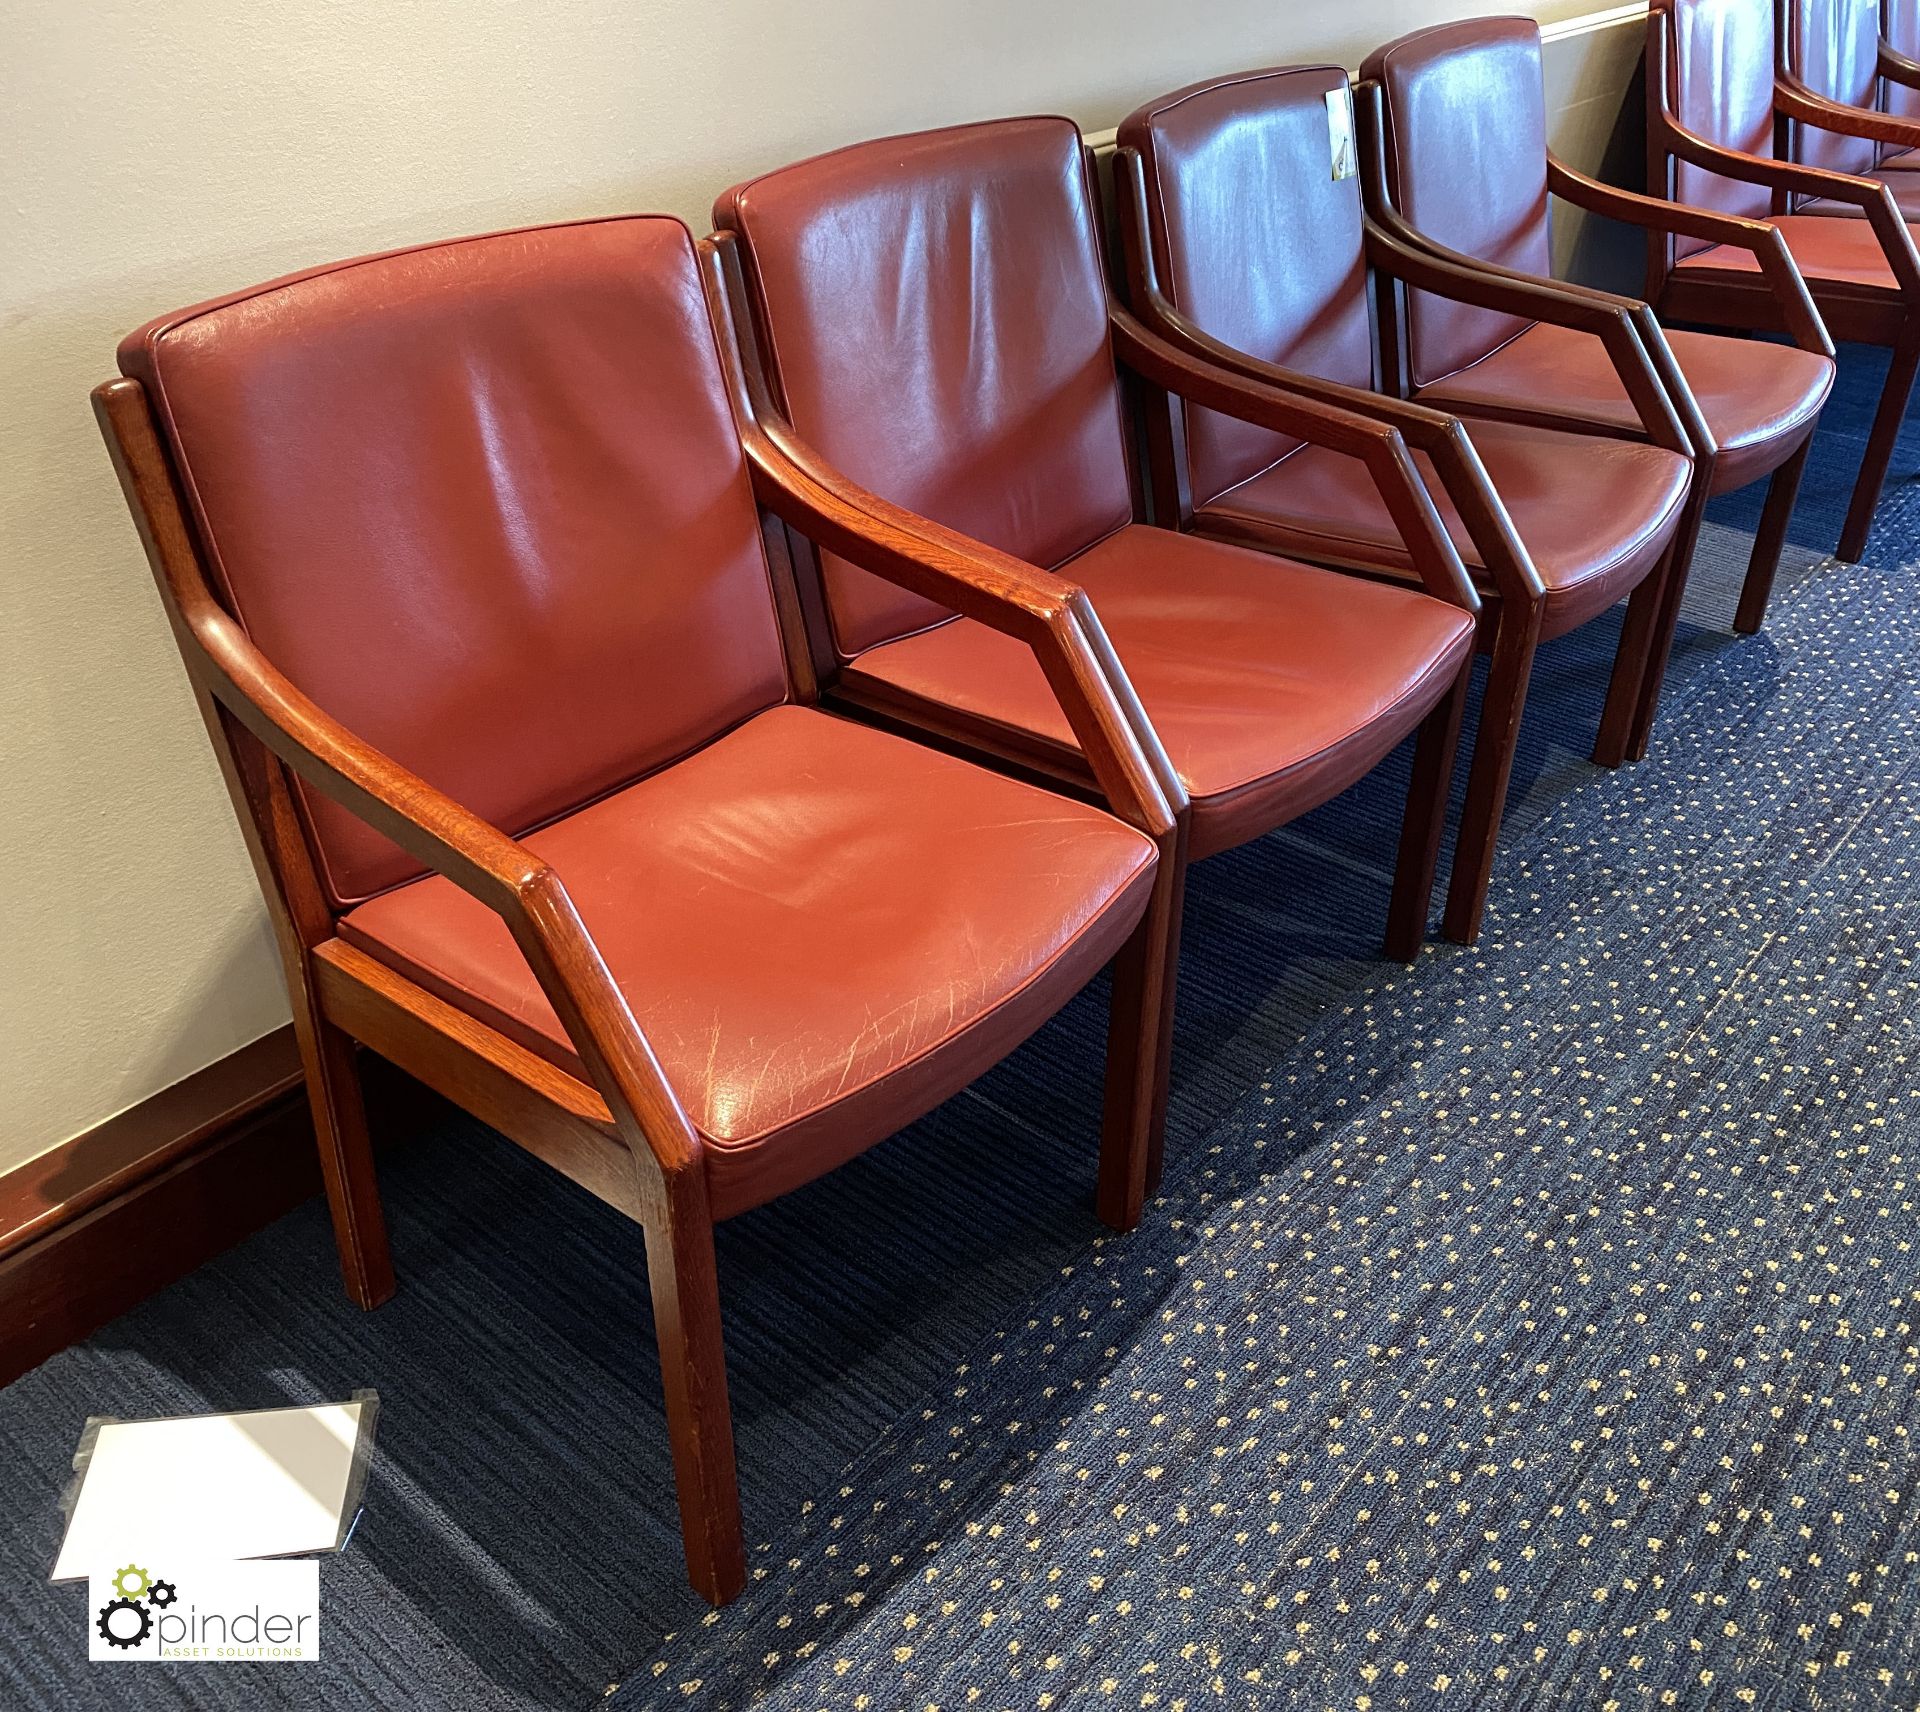 4 leather upholstered mahogany framed Meeting Chairs, plum (located in First Floor Boardroom/Meeting - Image 2 of 2